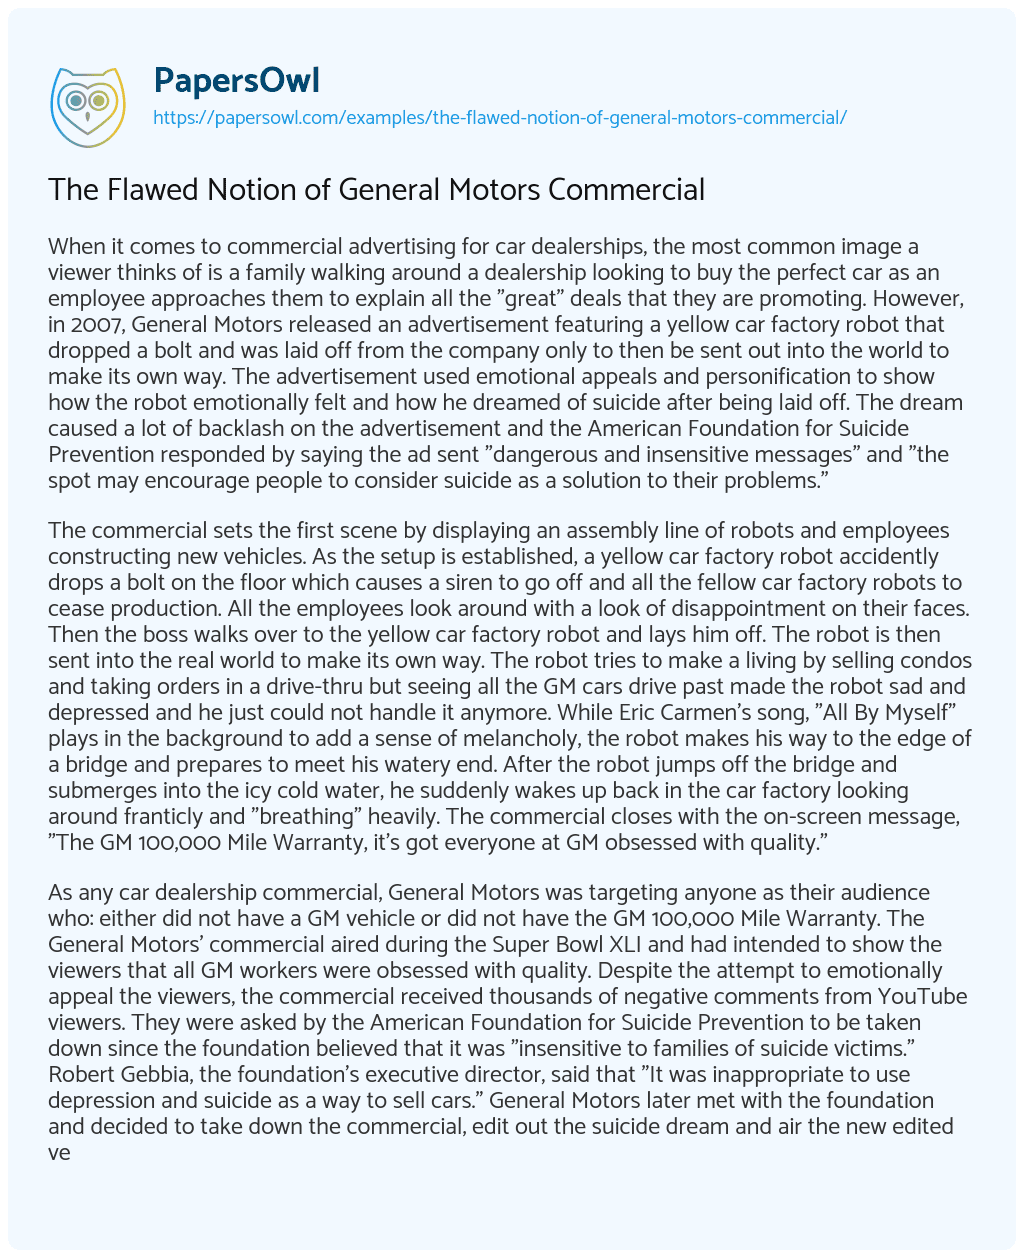 Essay on The Flawed Notion of General Motors Commercial